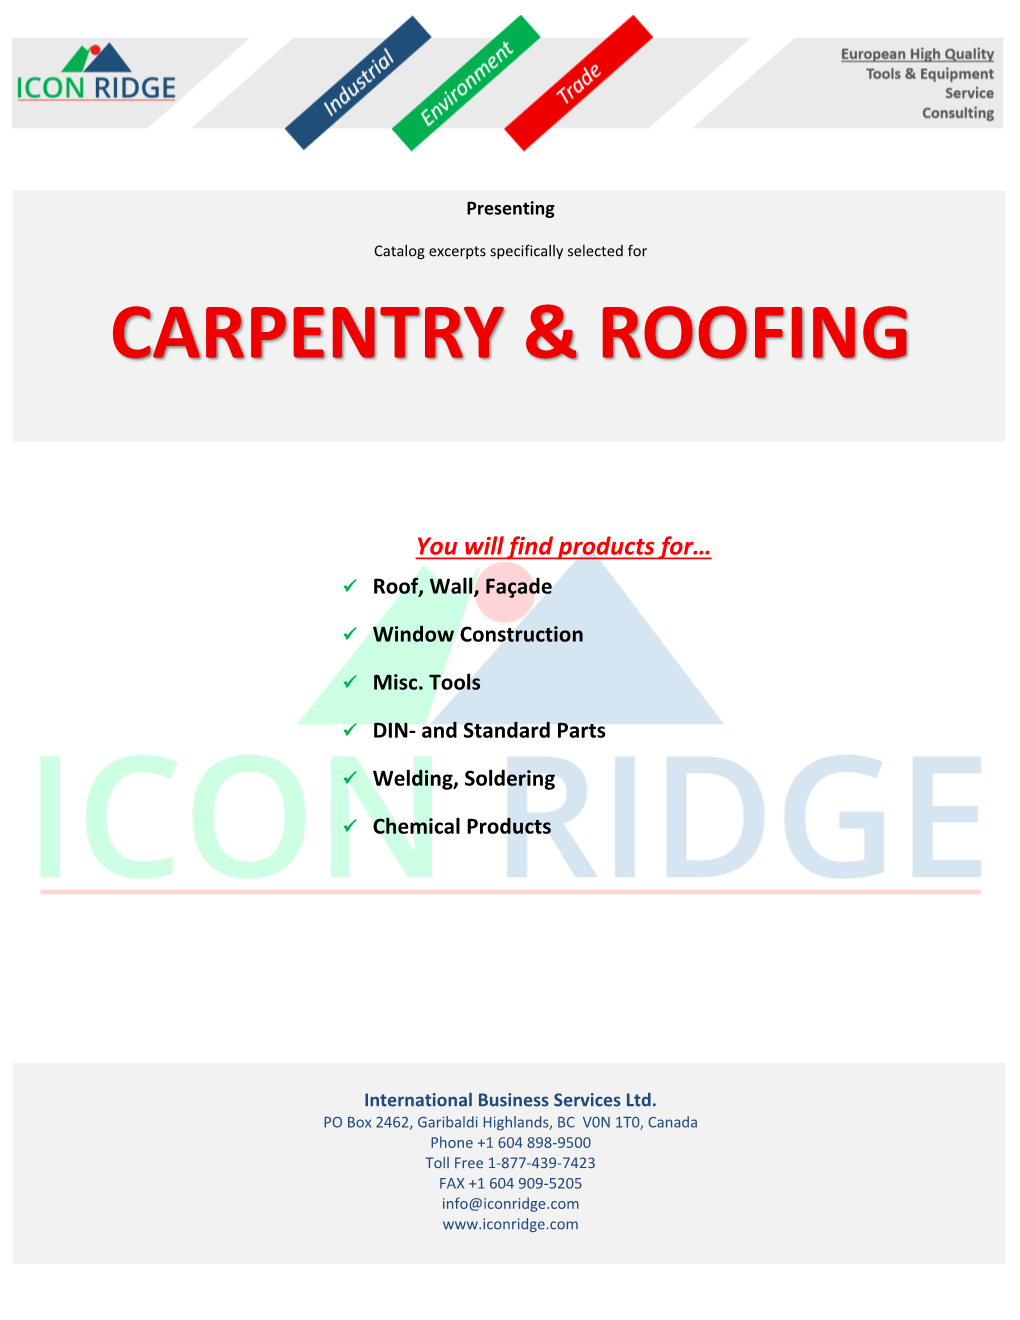 Carpentry & Roofing